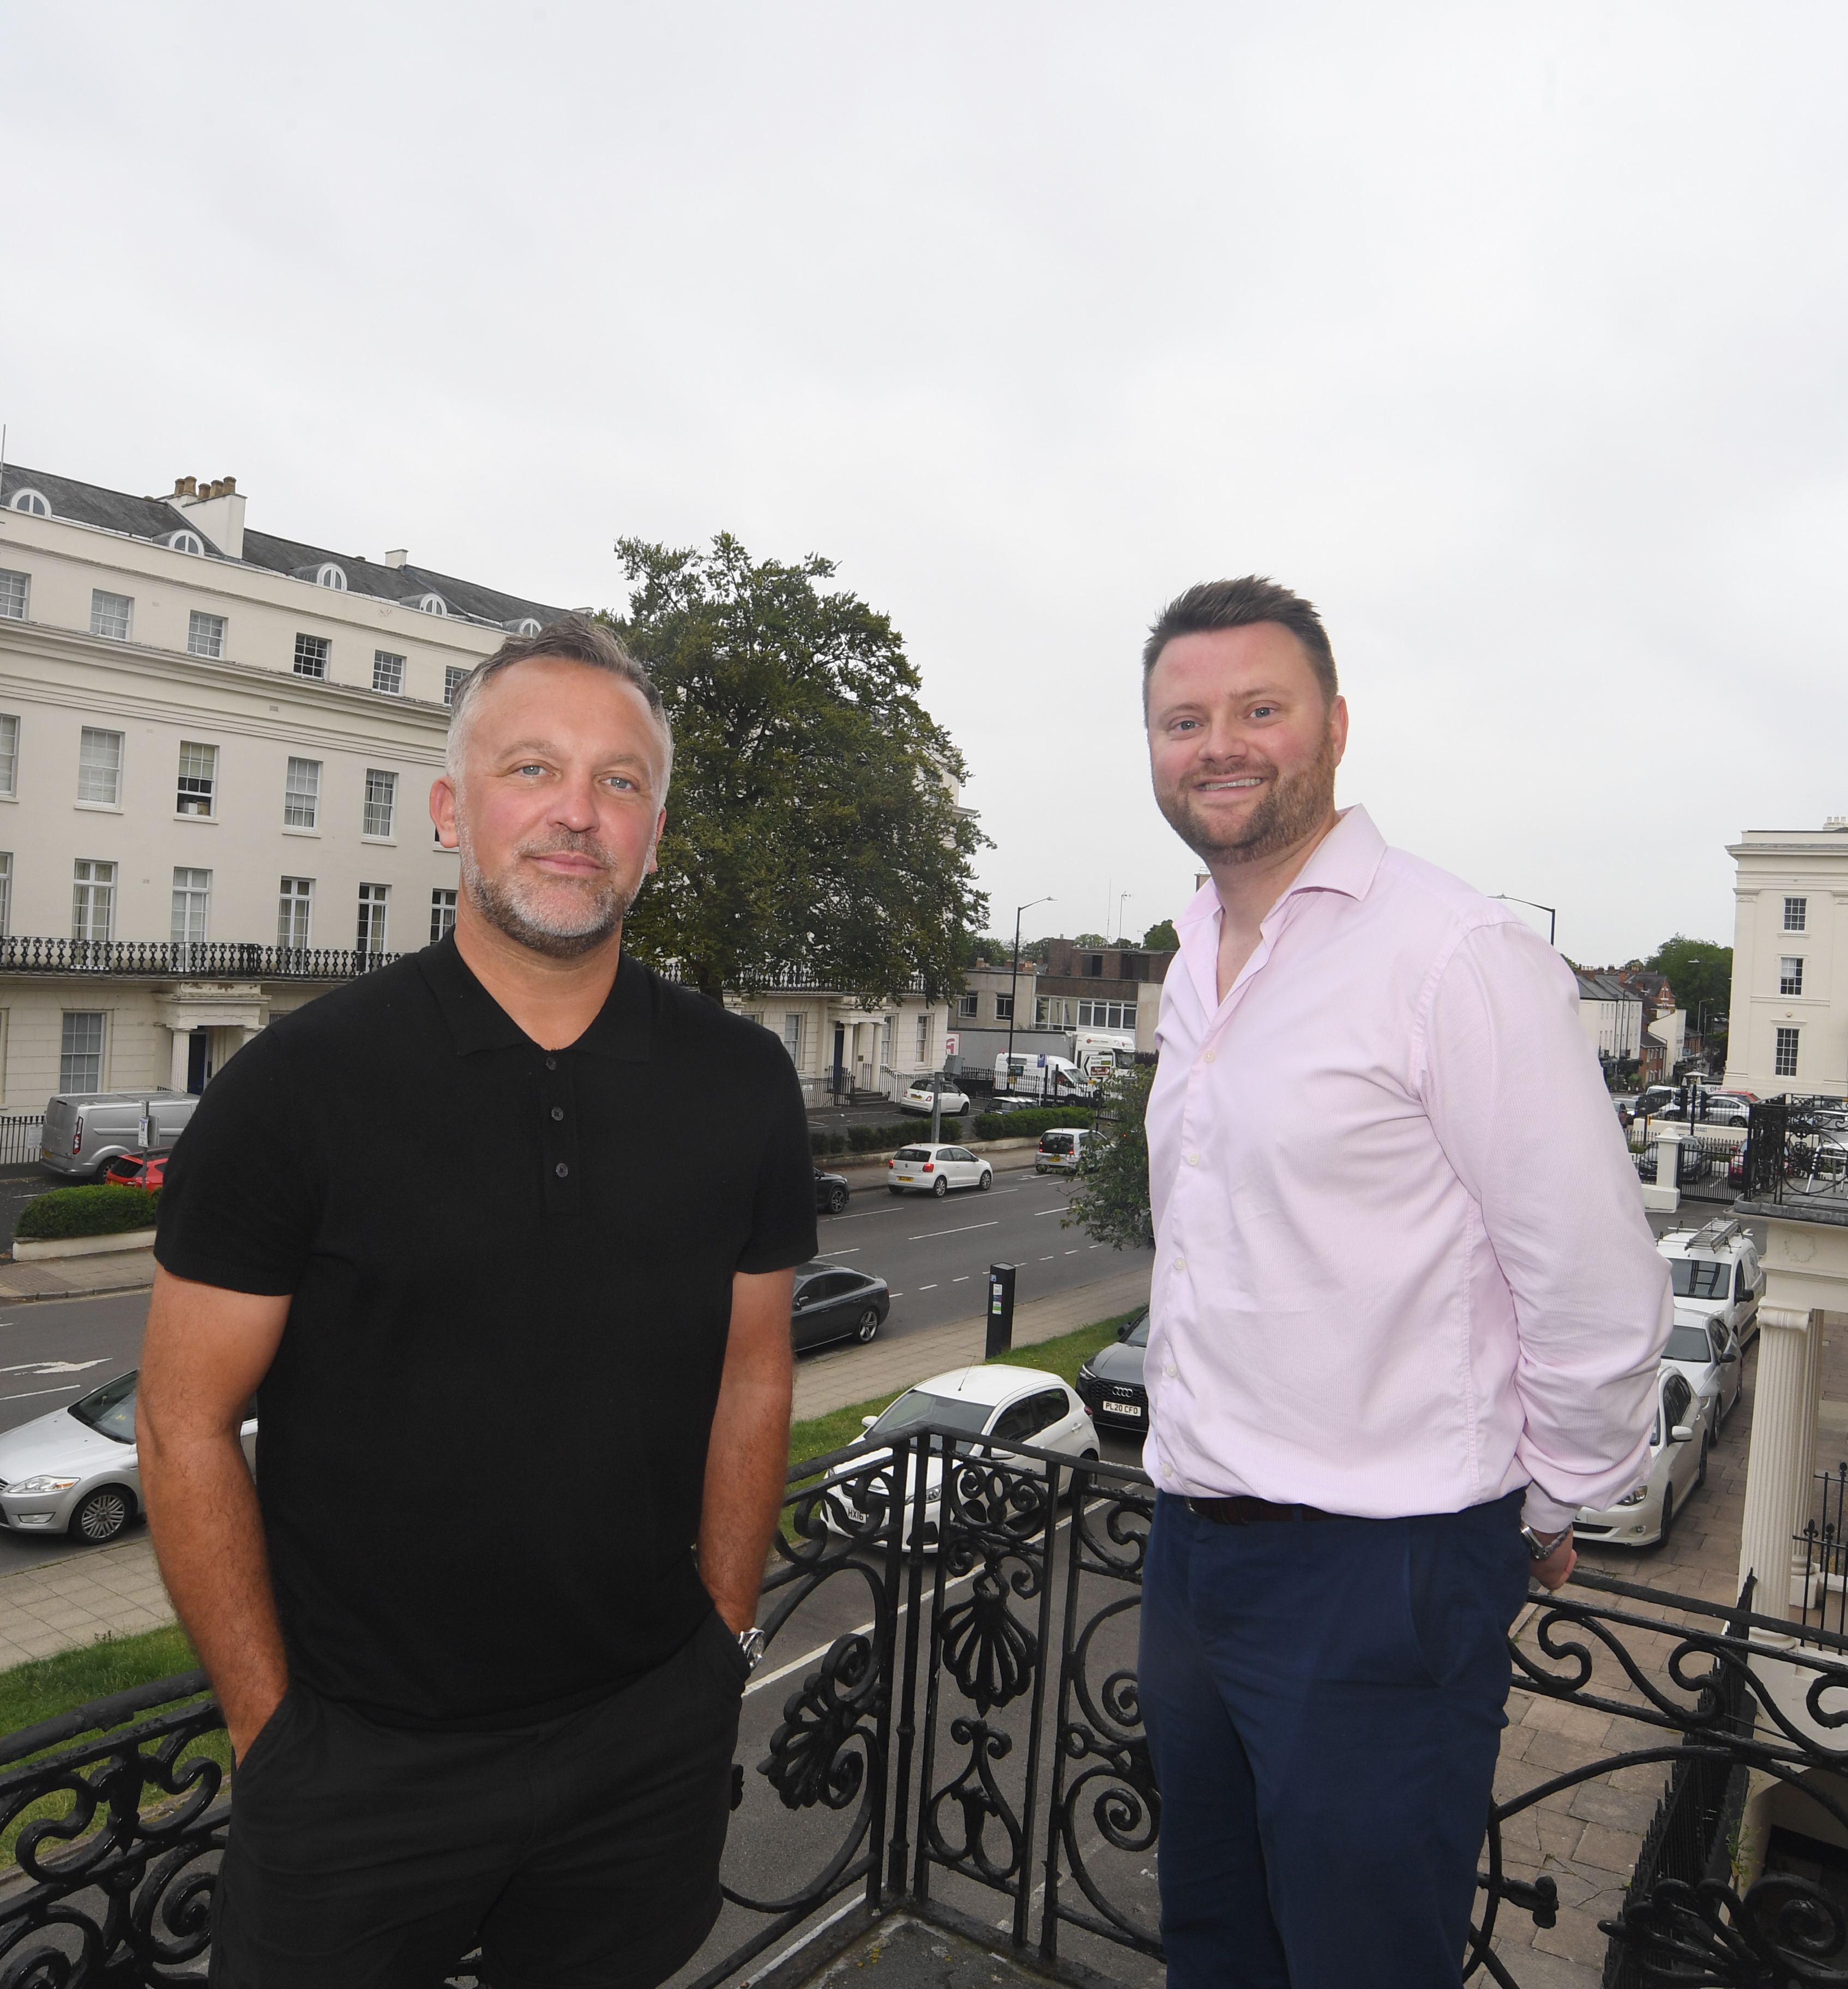 An expanding law firm is set to relocate to new offices in Leamington Spa as part of its ambitious plans for growth